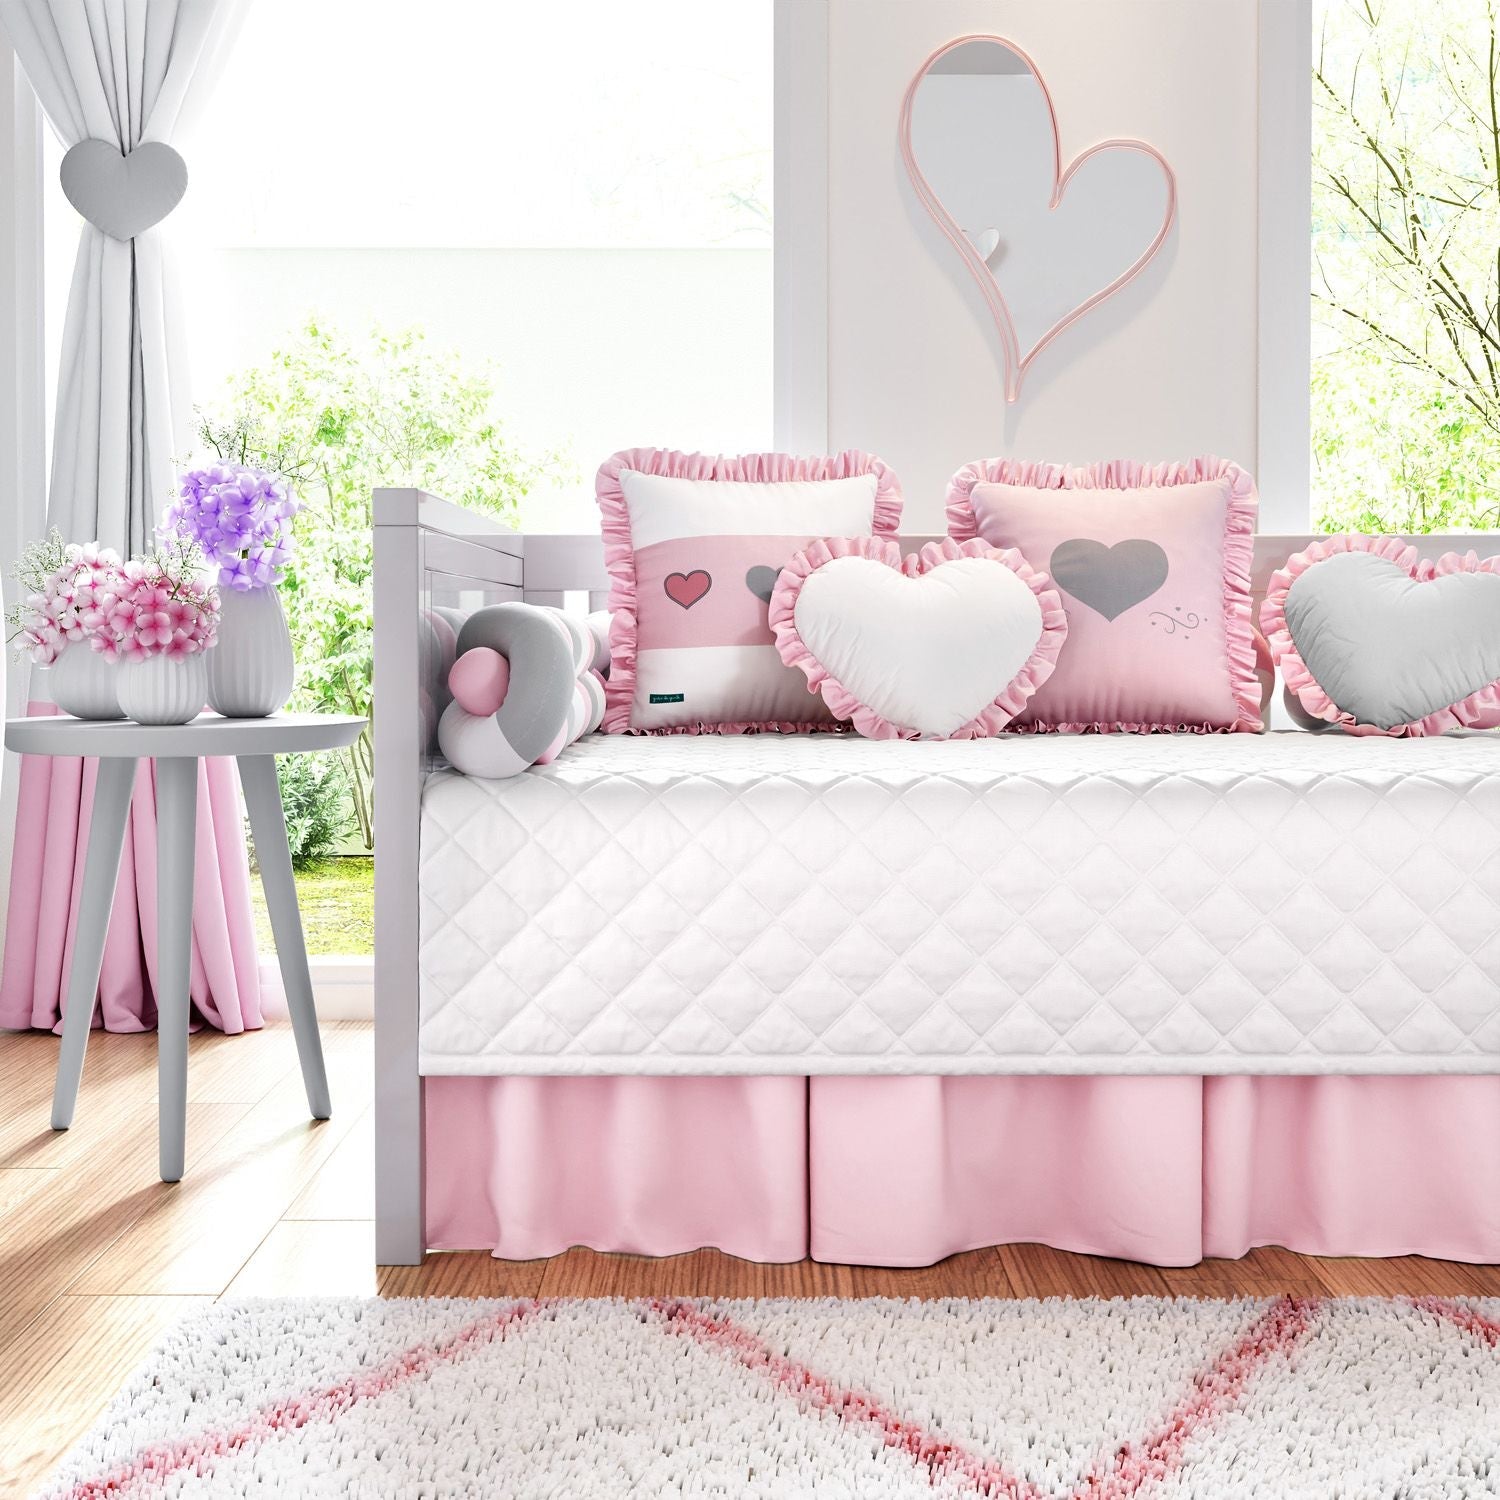 6 Piece Pink Heart Daybed Bedding Set